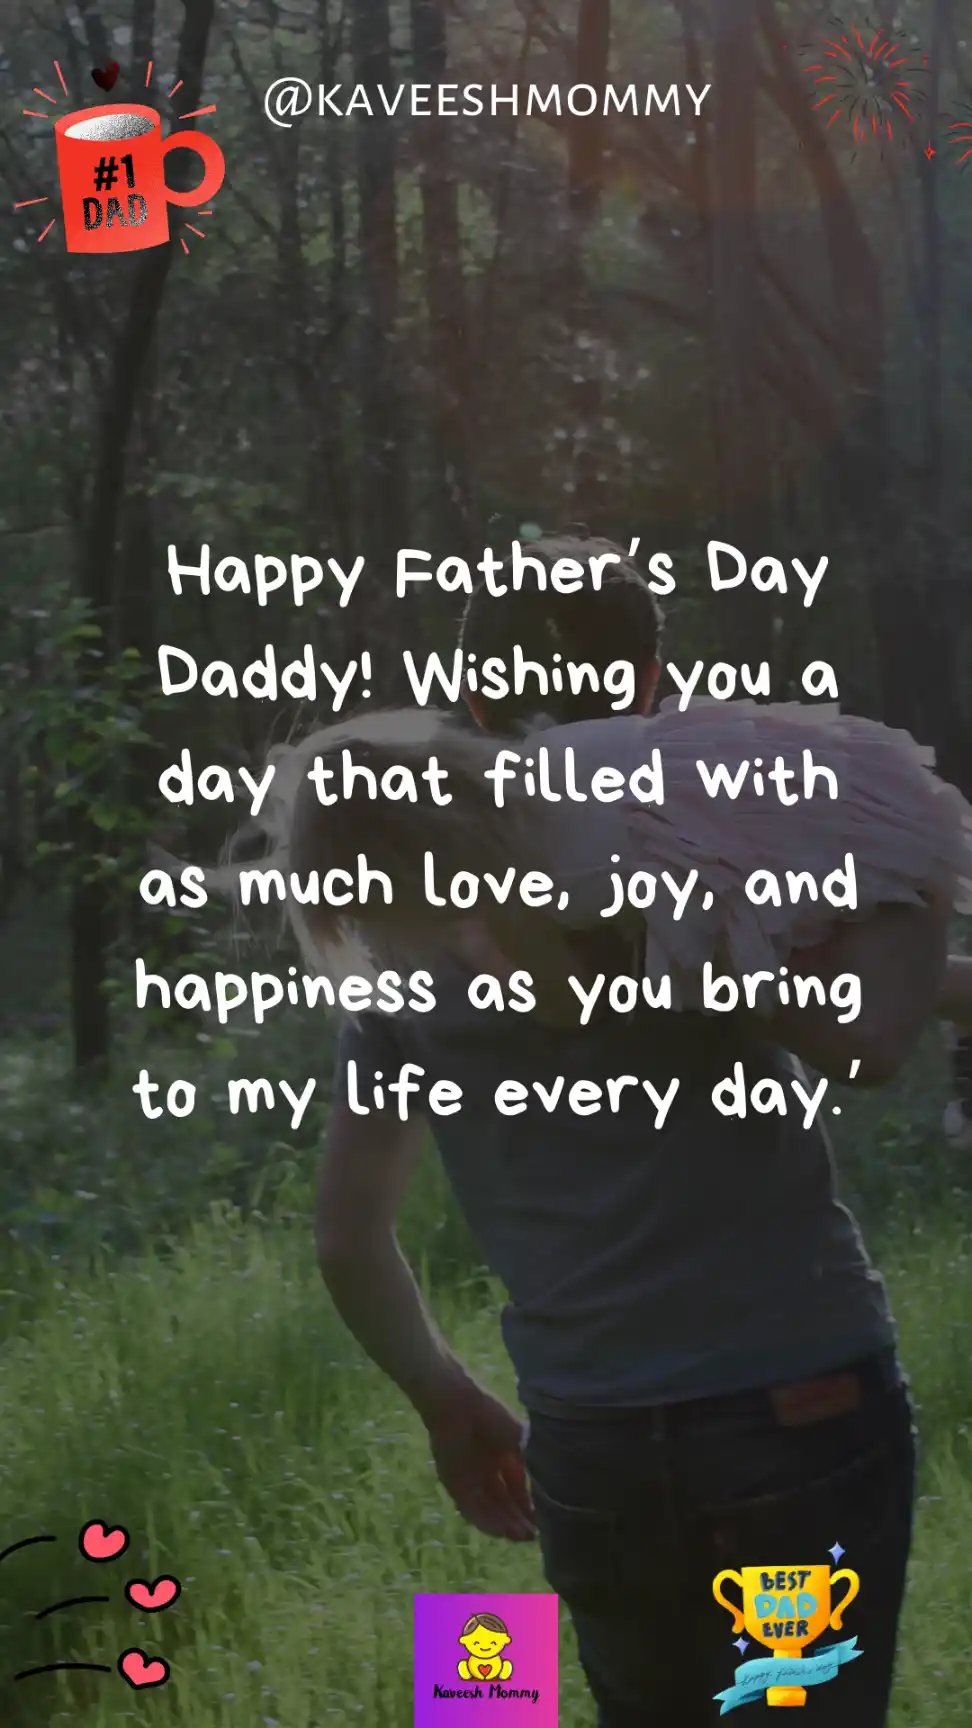 long fathers day wishes from daughter-Happy Father’s Day Daddy! Wishing you a day that filled with as much love, joy, and happiness as you bring to my life every day.’